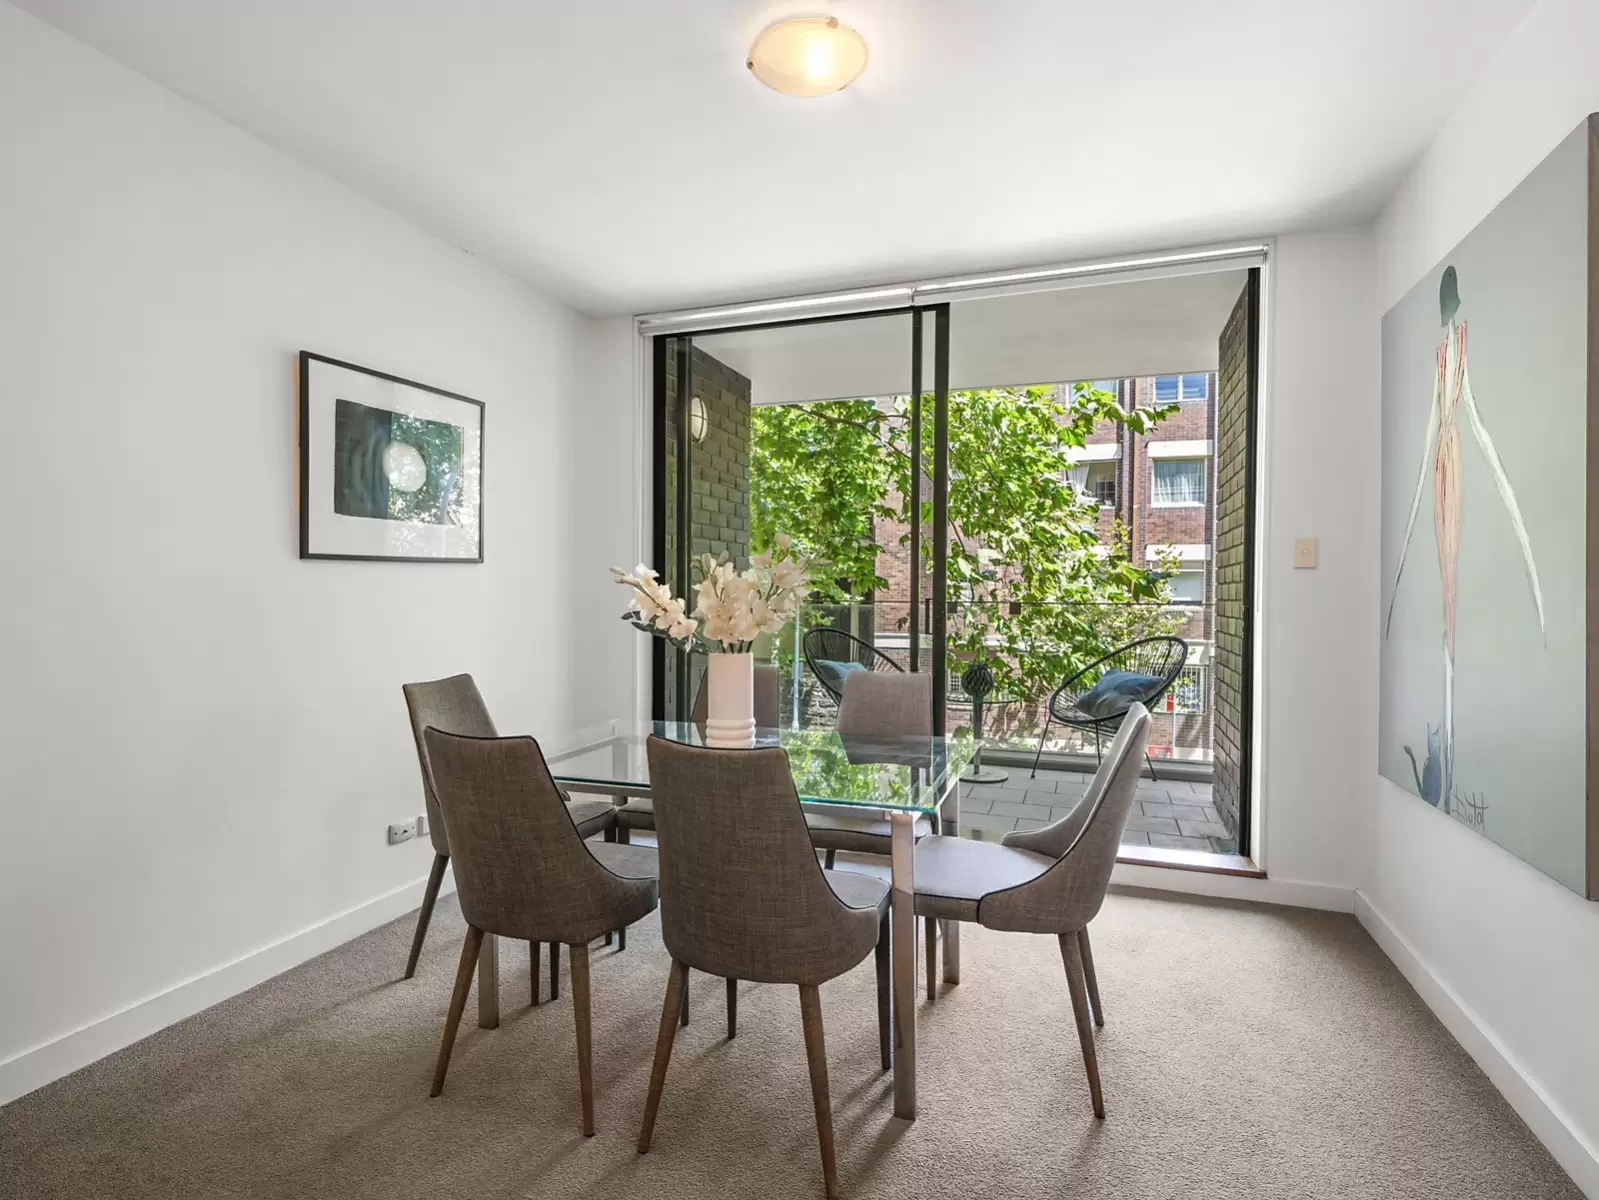 Photo #5: 117/1a Tusculum Street, Potts Point - Sold by Sydney Sotheby's International Realty